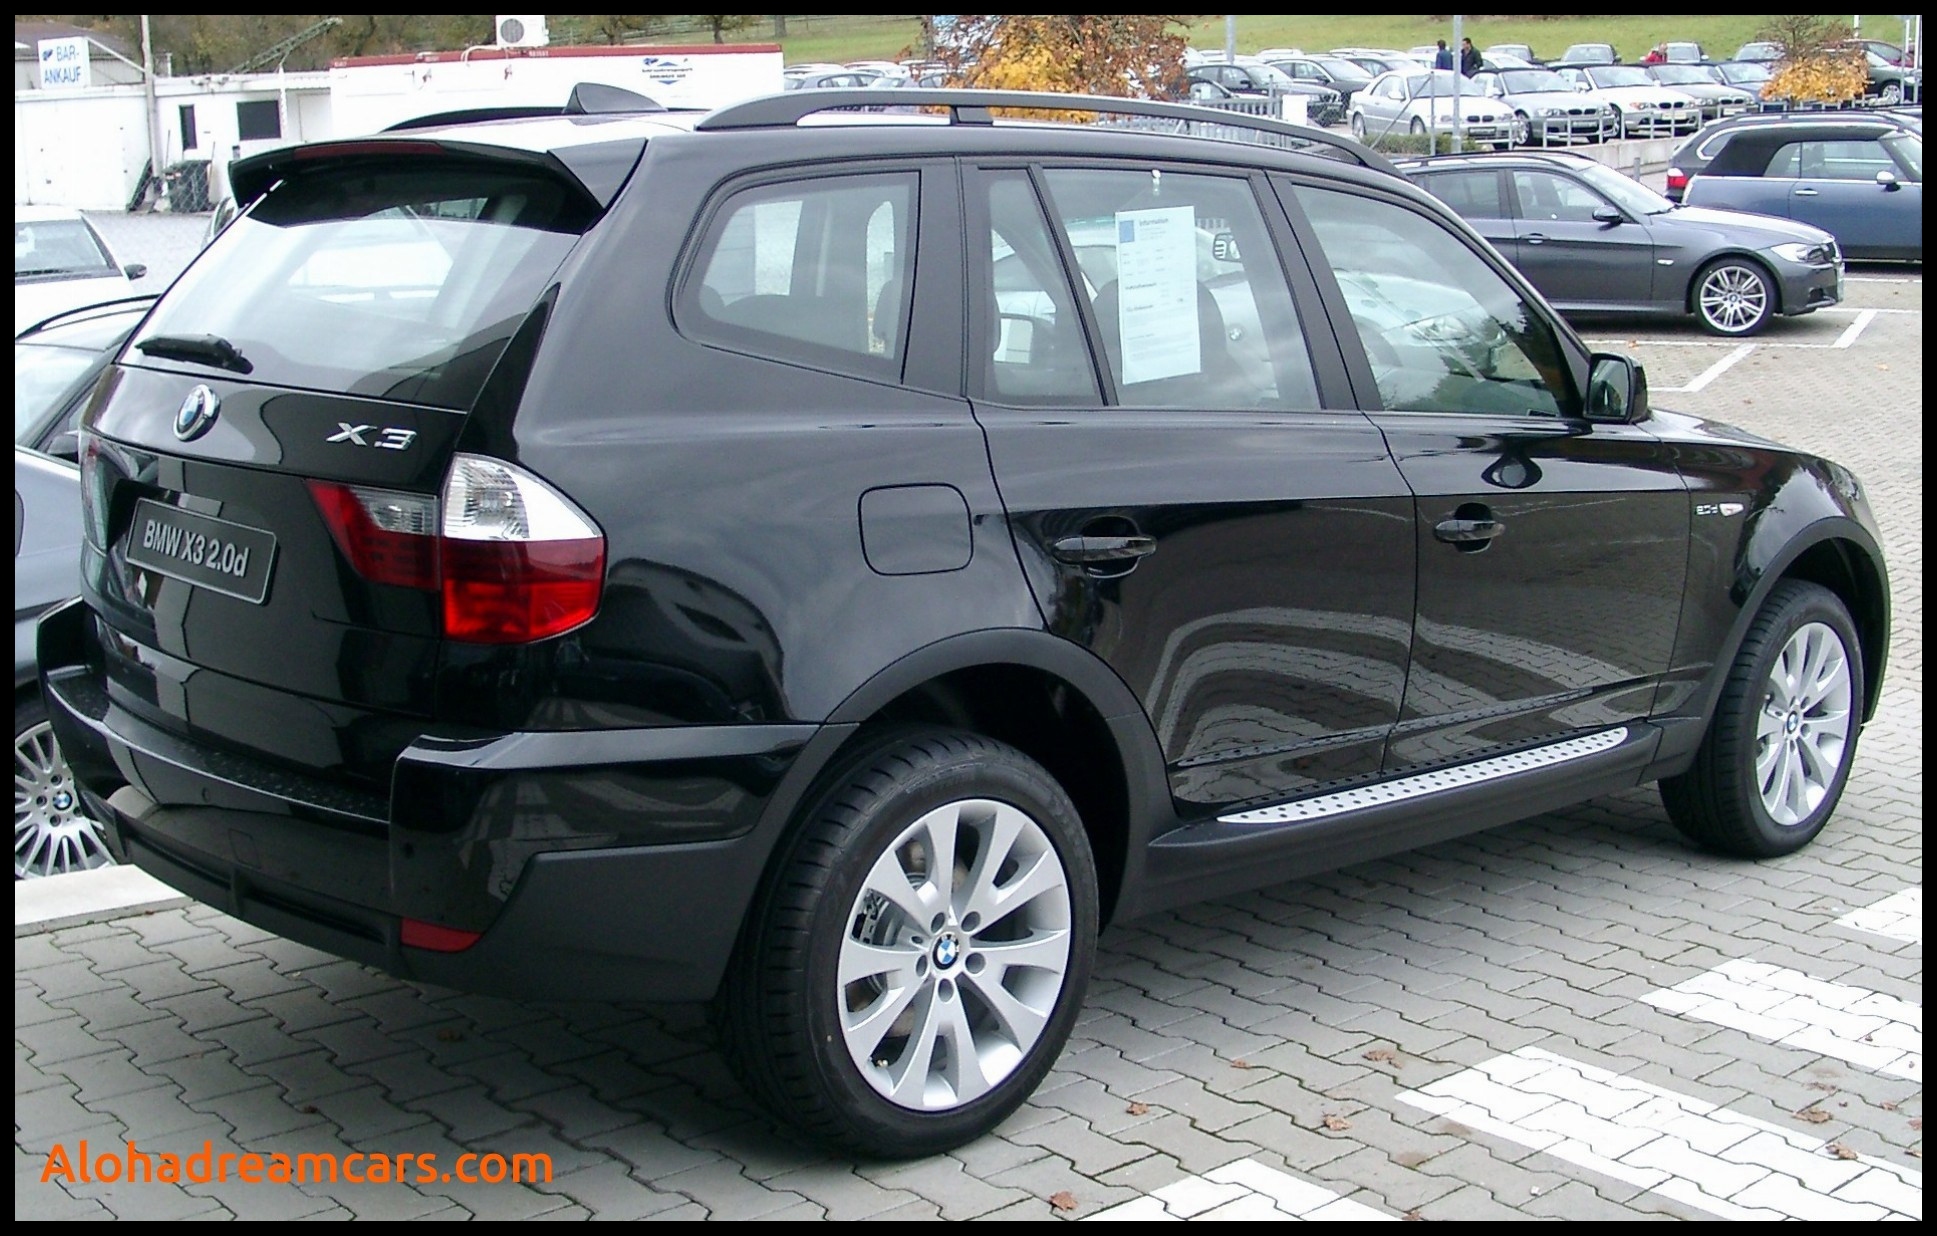 X3 Dimensions 2019 2019 Bmw X3 Specs and Review 2006 Bmw X3 S Informations Articles